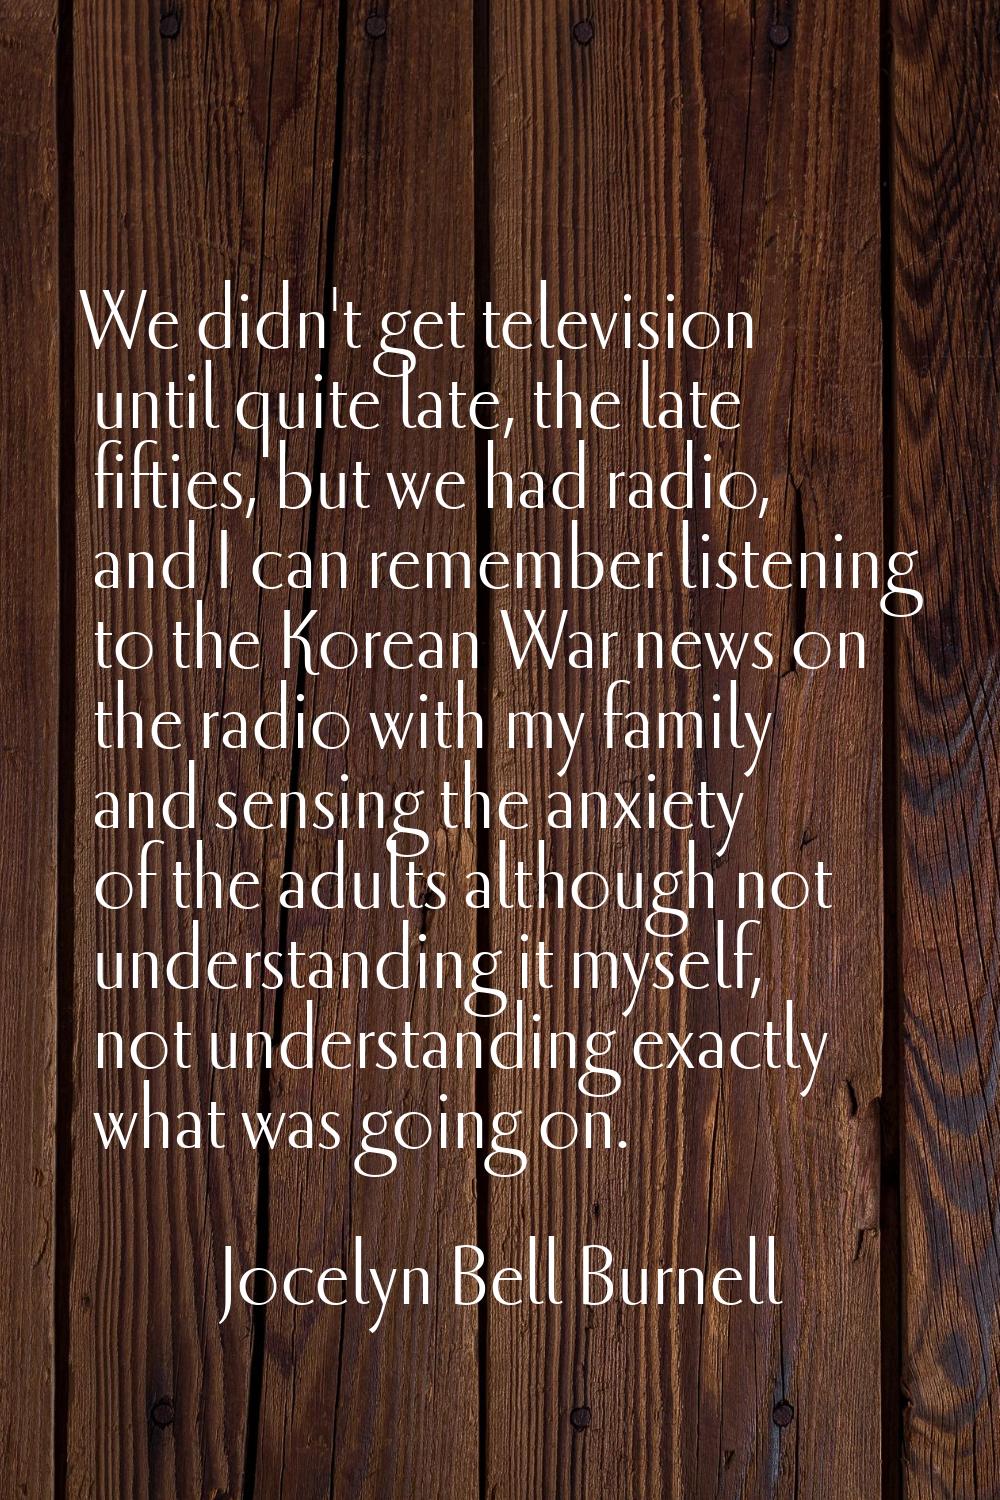 We didn't get television until quite late, the late fifties, but we had radio, and I can remember l